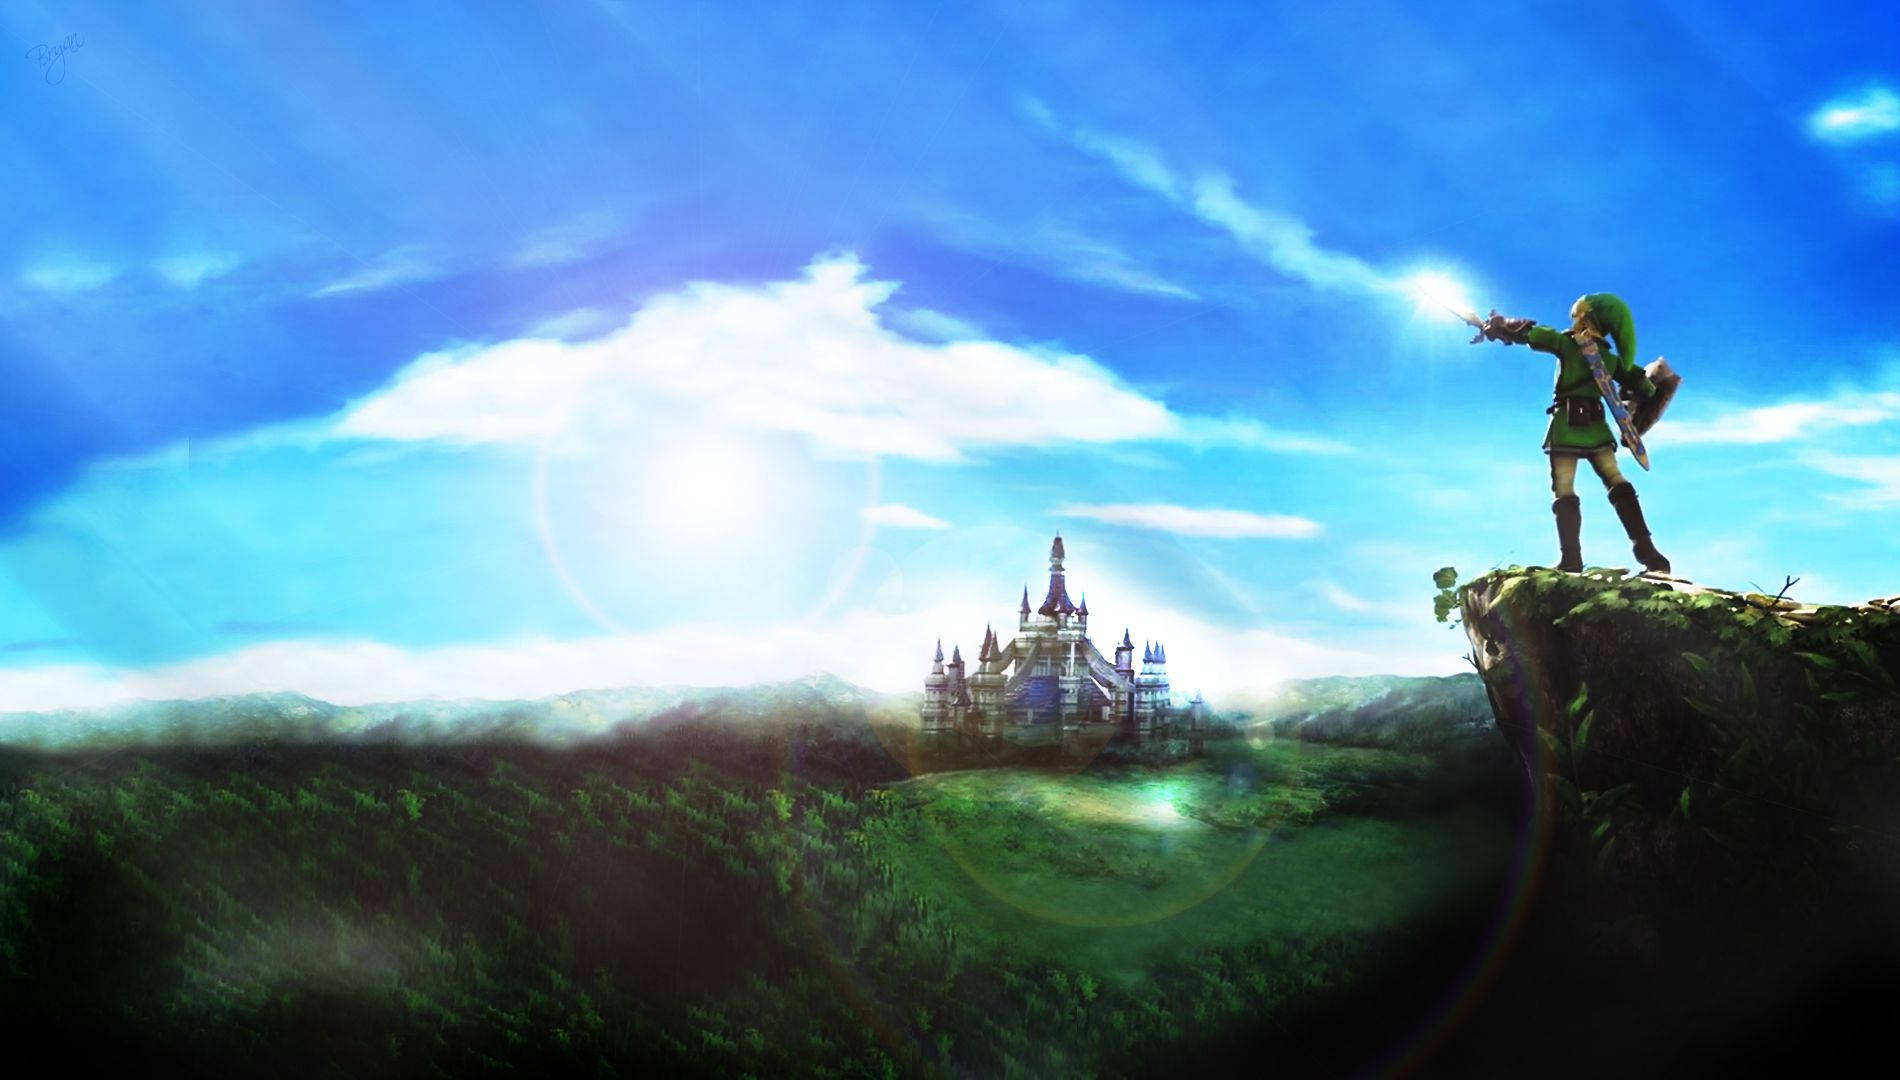 Explore the beautiful world of Hyrule in the 